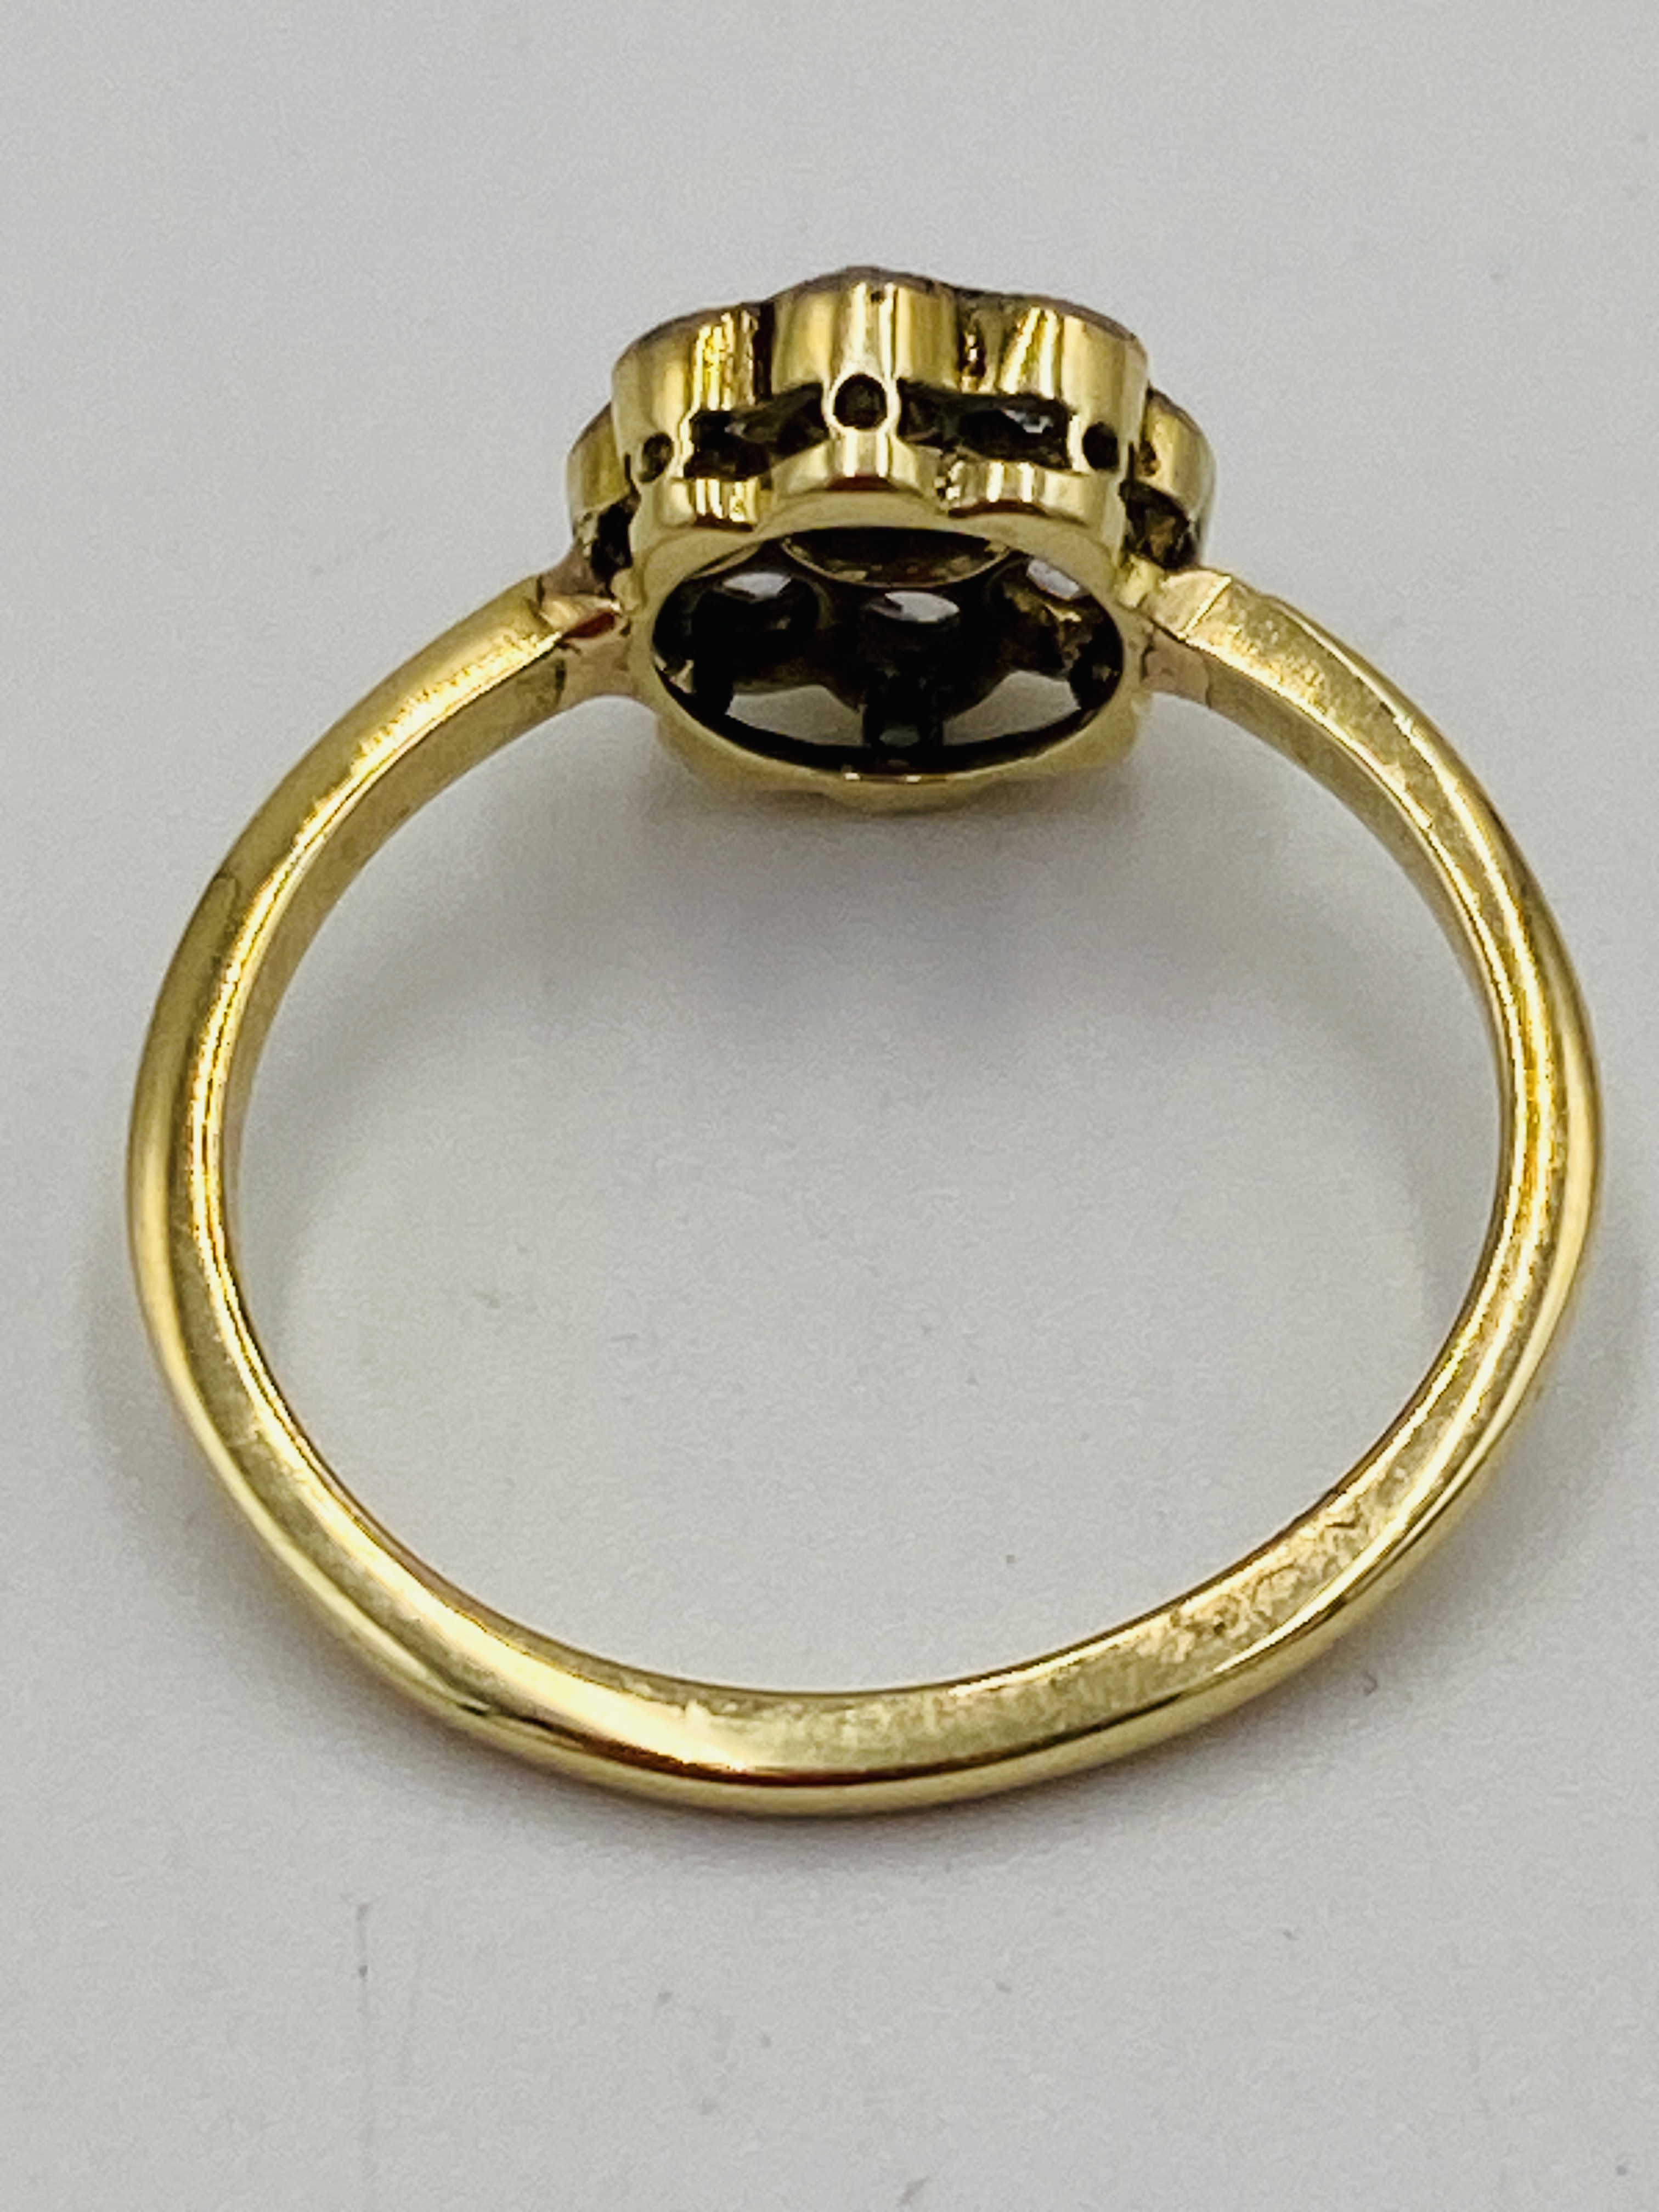 Gold and diamond 'daisy' ring - Image 6 of 6